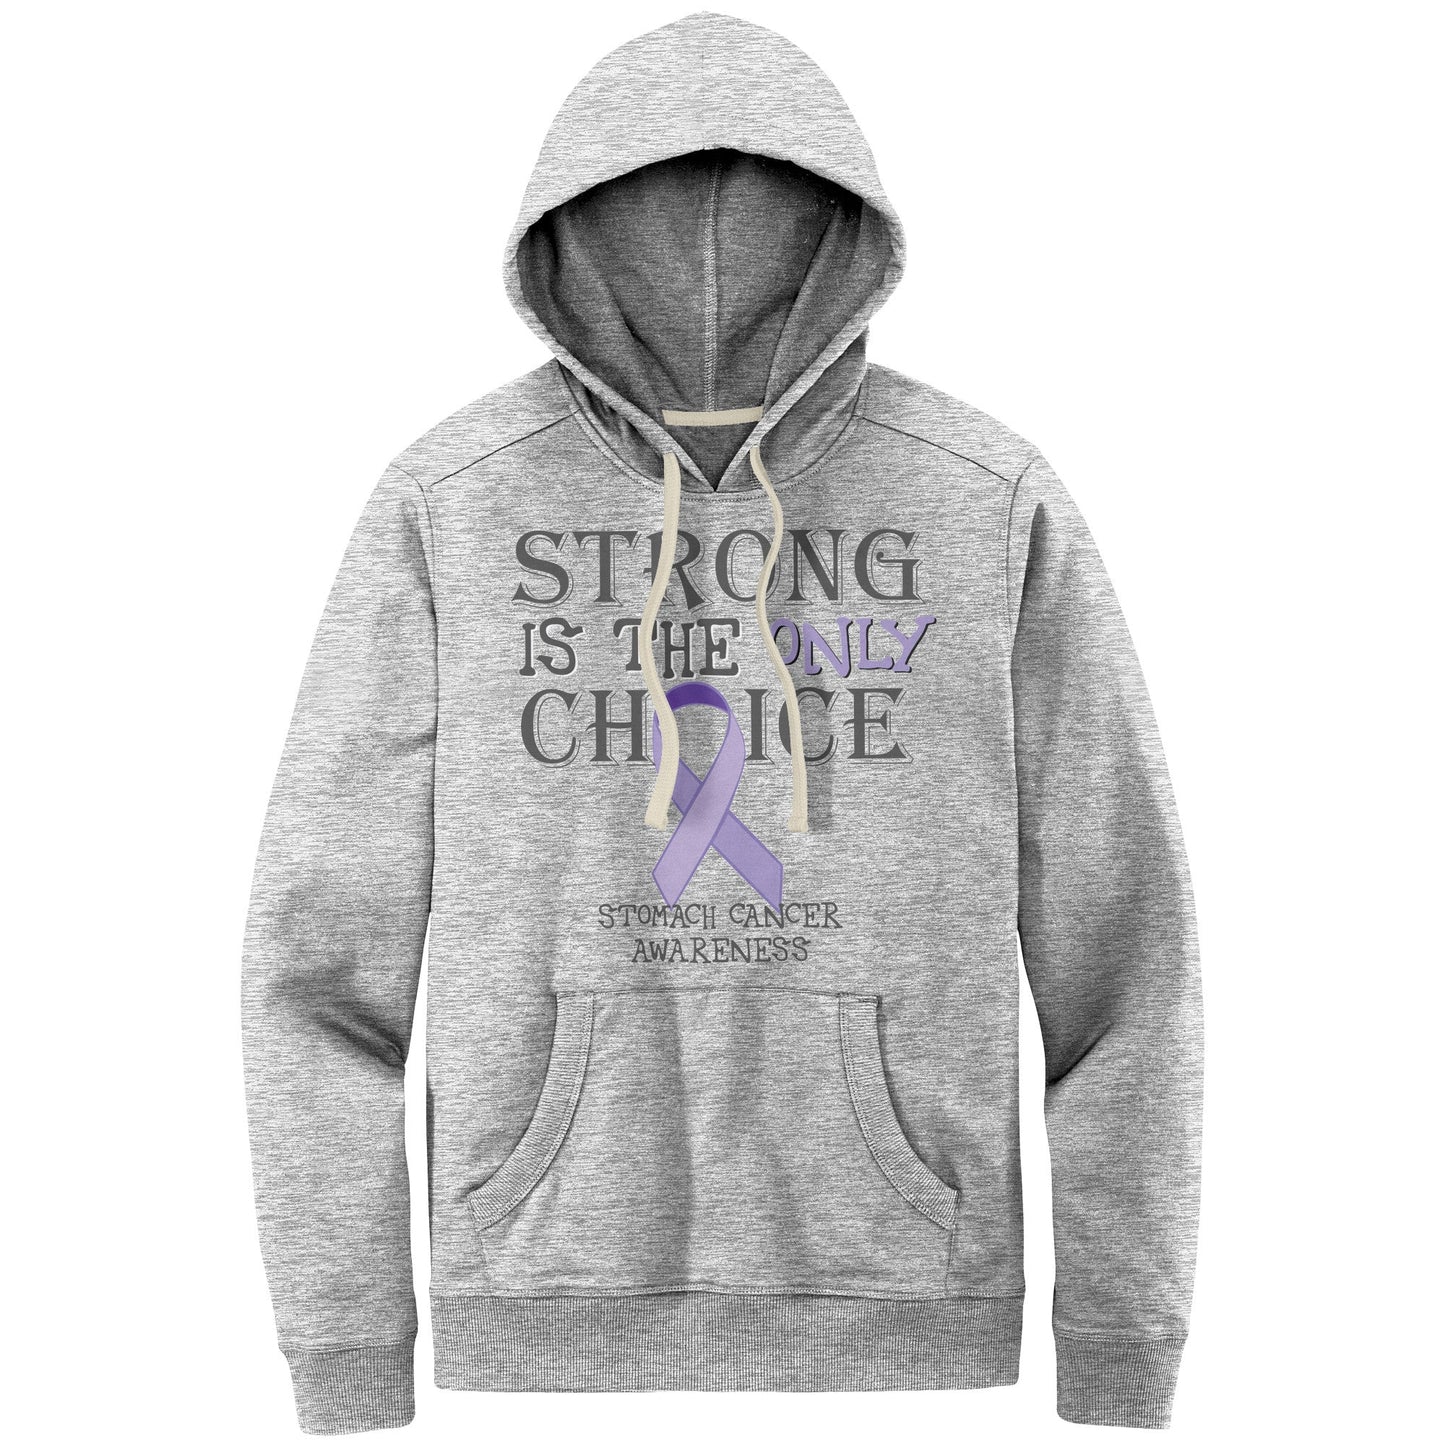 Strong is the Only Choice -Stomach Cancer Awareness T-Shirt, Hoodie, Tank |x|